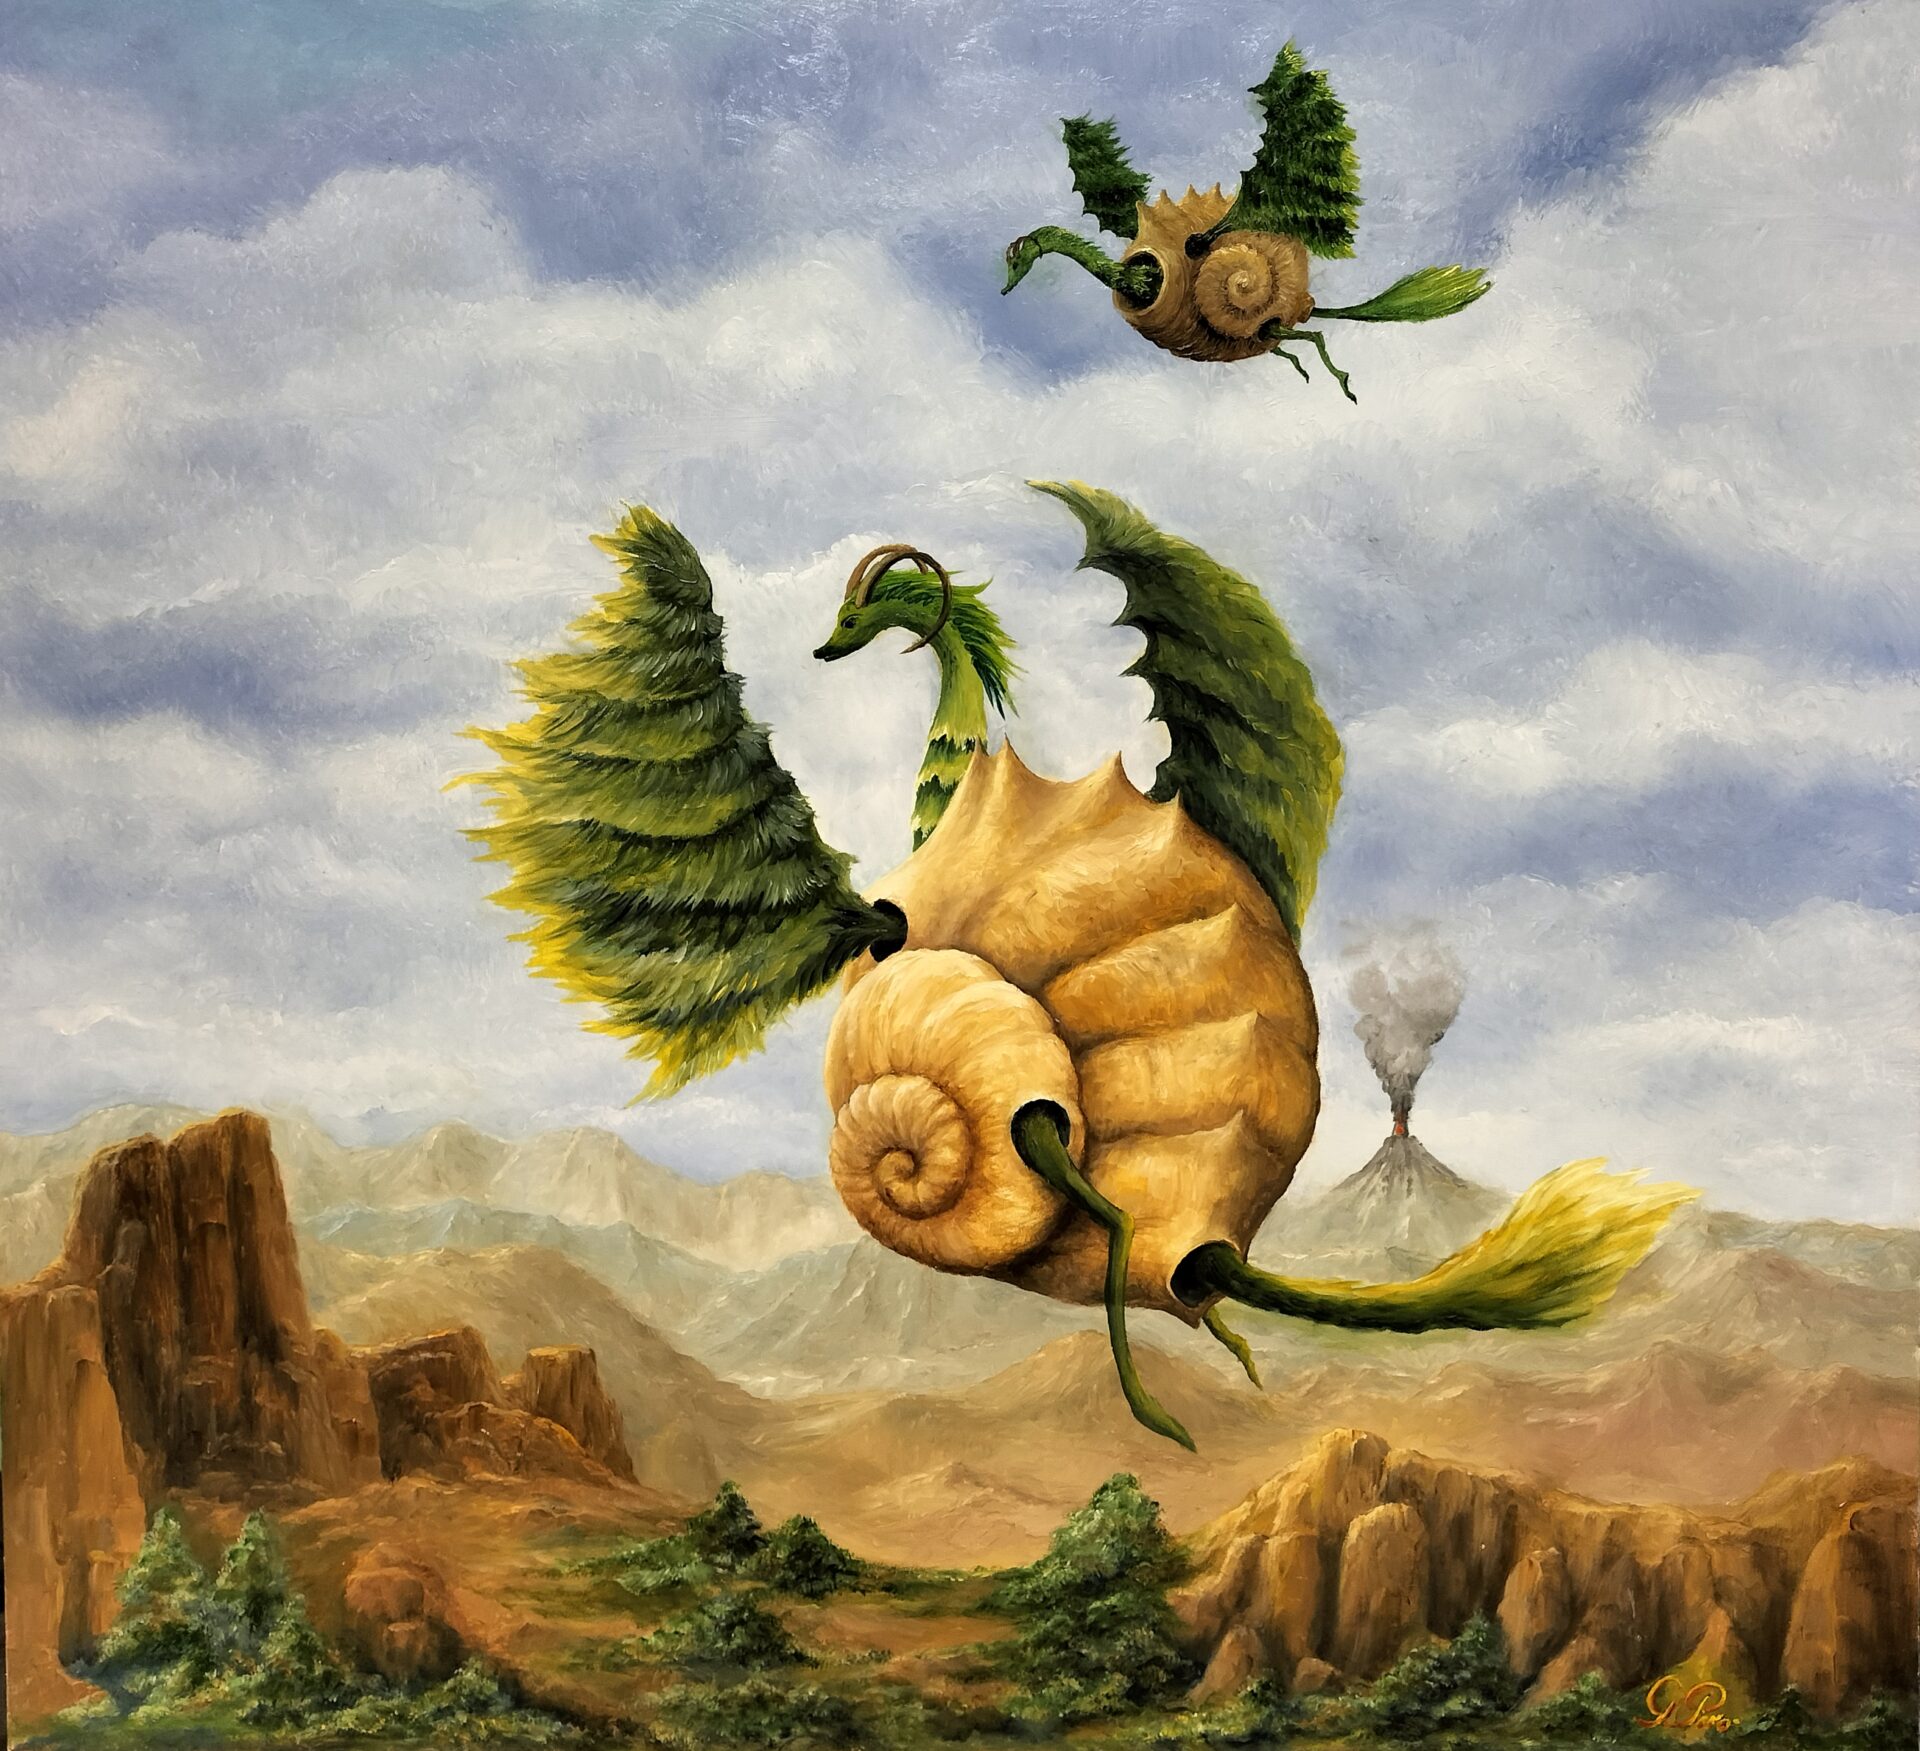 gregory pyra piro, surrealist, oil painting, landscape, planet, solar system, green dragon, dragon with horns, conch, vest, mountains, bushes, trees, erupting volcano